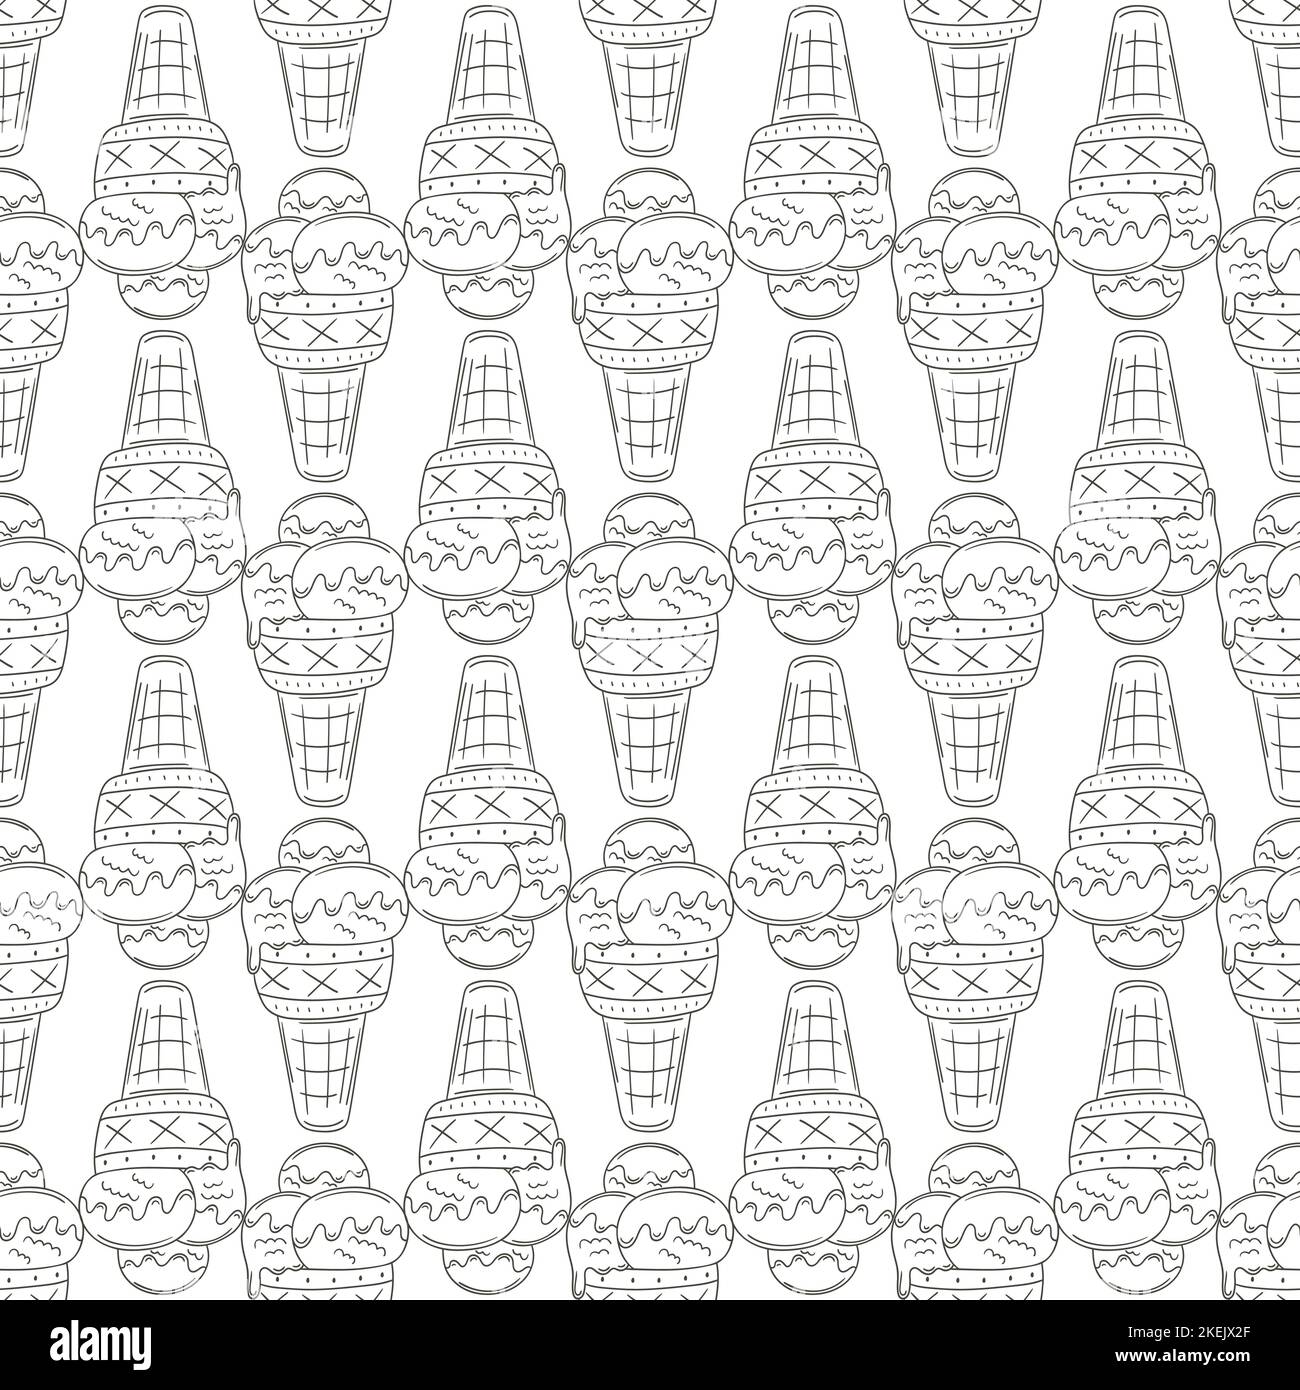 Coloring ice cream in waffle cones seamless pattern. Summer. Wonderful pattern with cold dessert. Print for cloth design, textile, fabric, wallpaper, Stock Vector